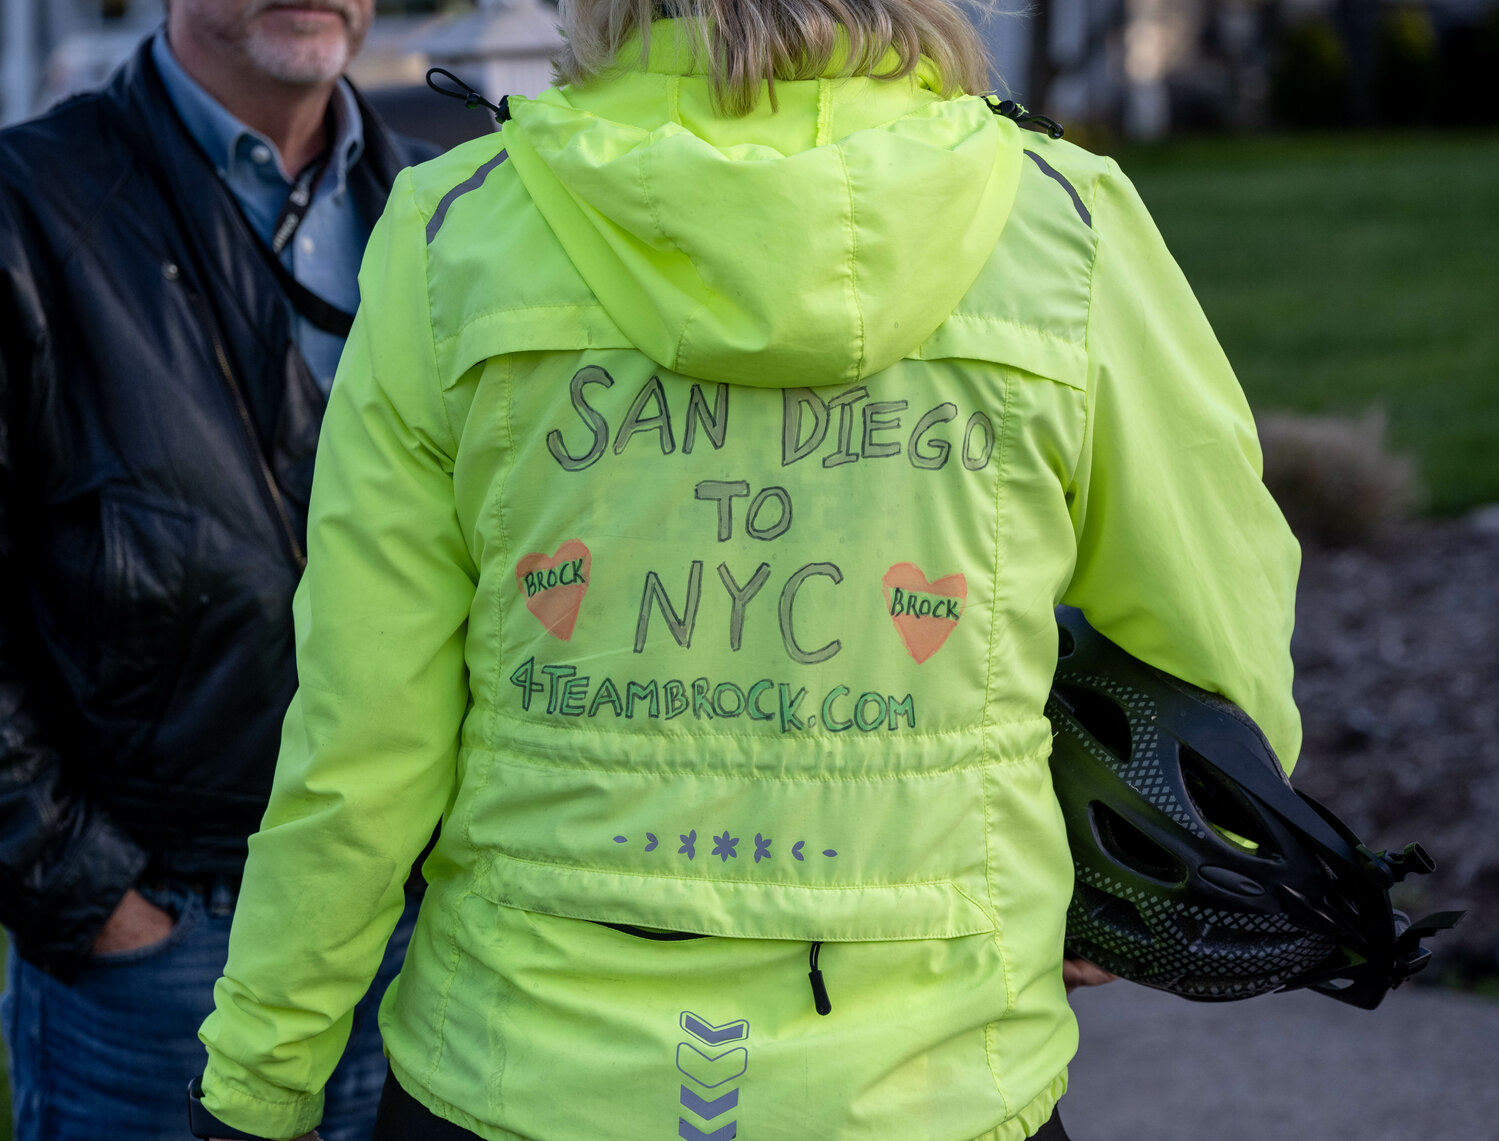 The back of Debbie Tallman Curtis’ windbreaker lays our her mission.